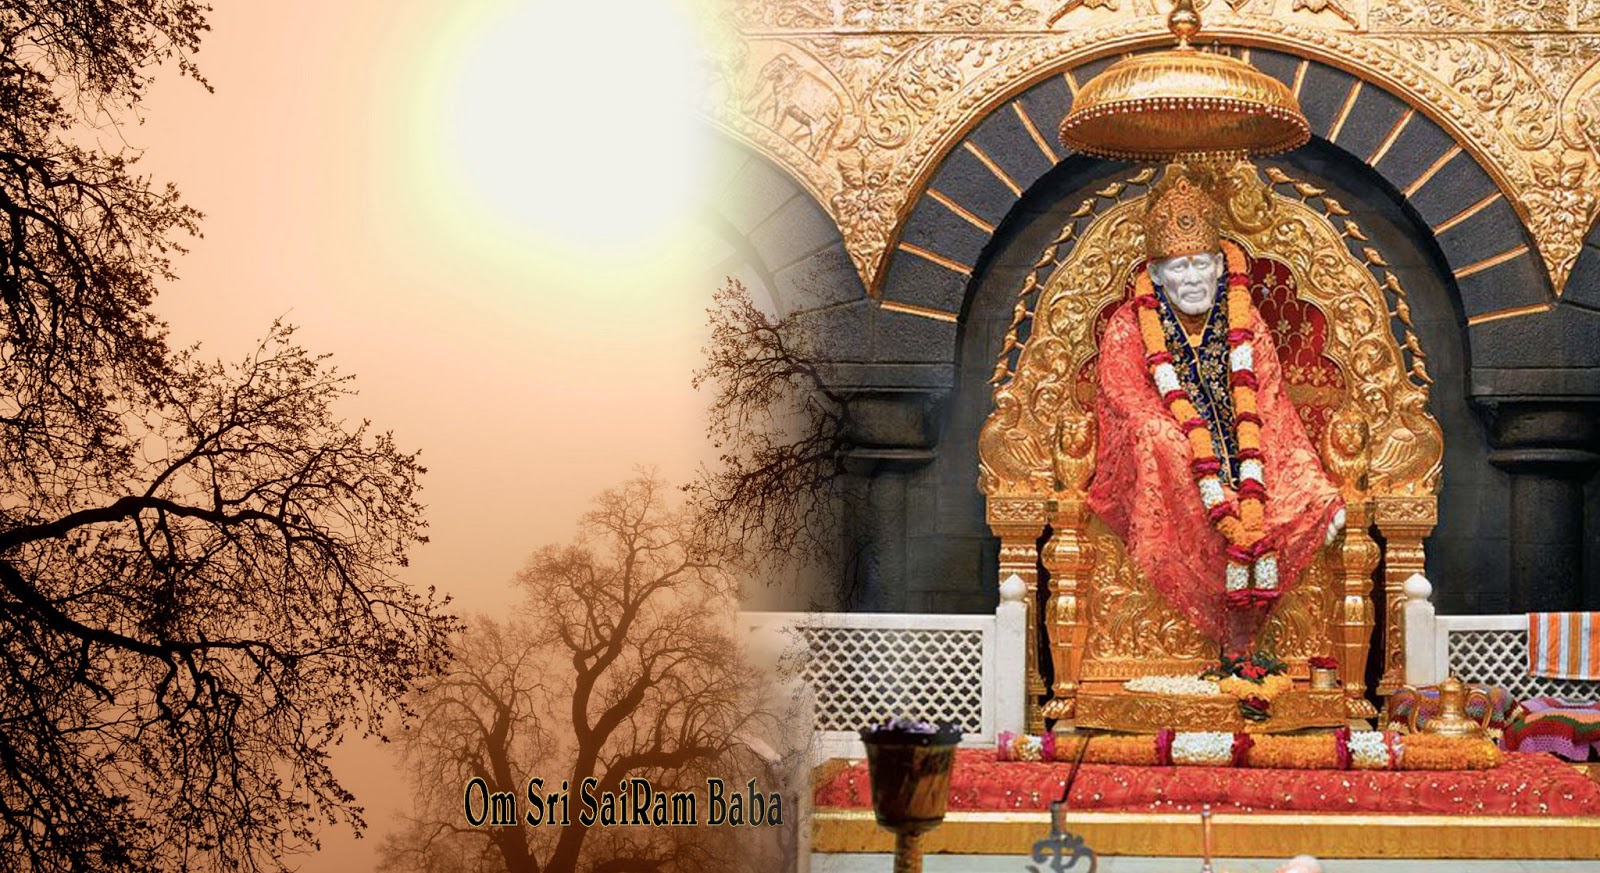 Free Sai Baba HD Pictures, Wallpaper Download - Festival Chaska